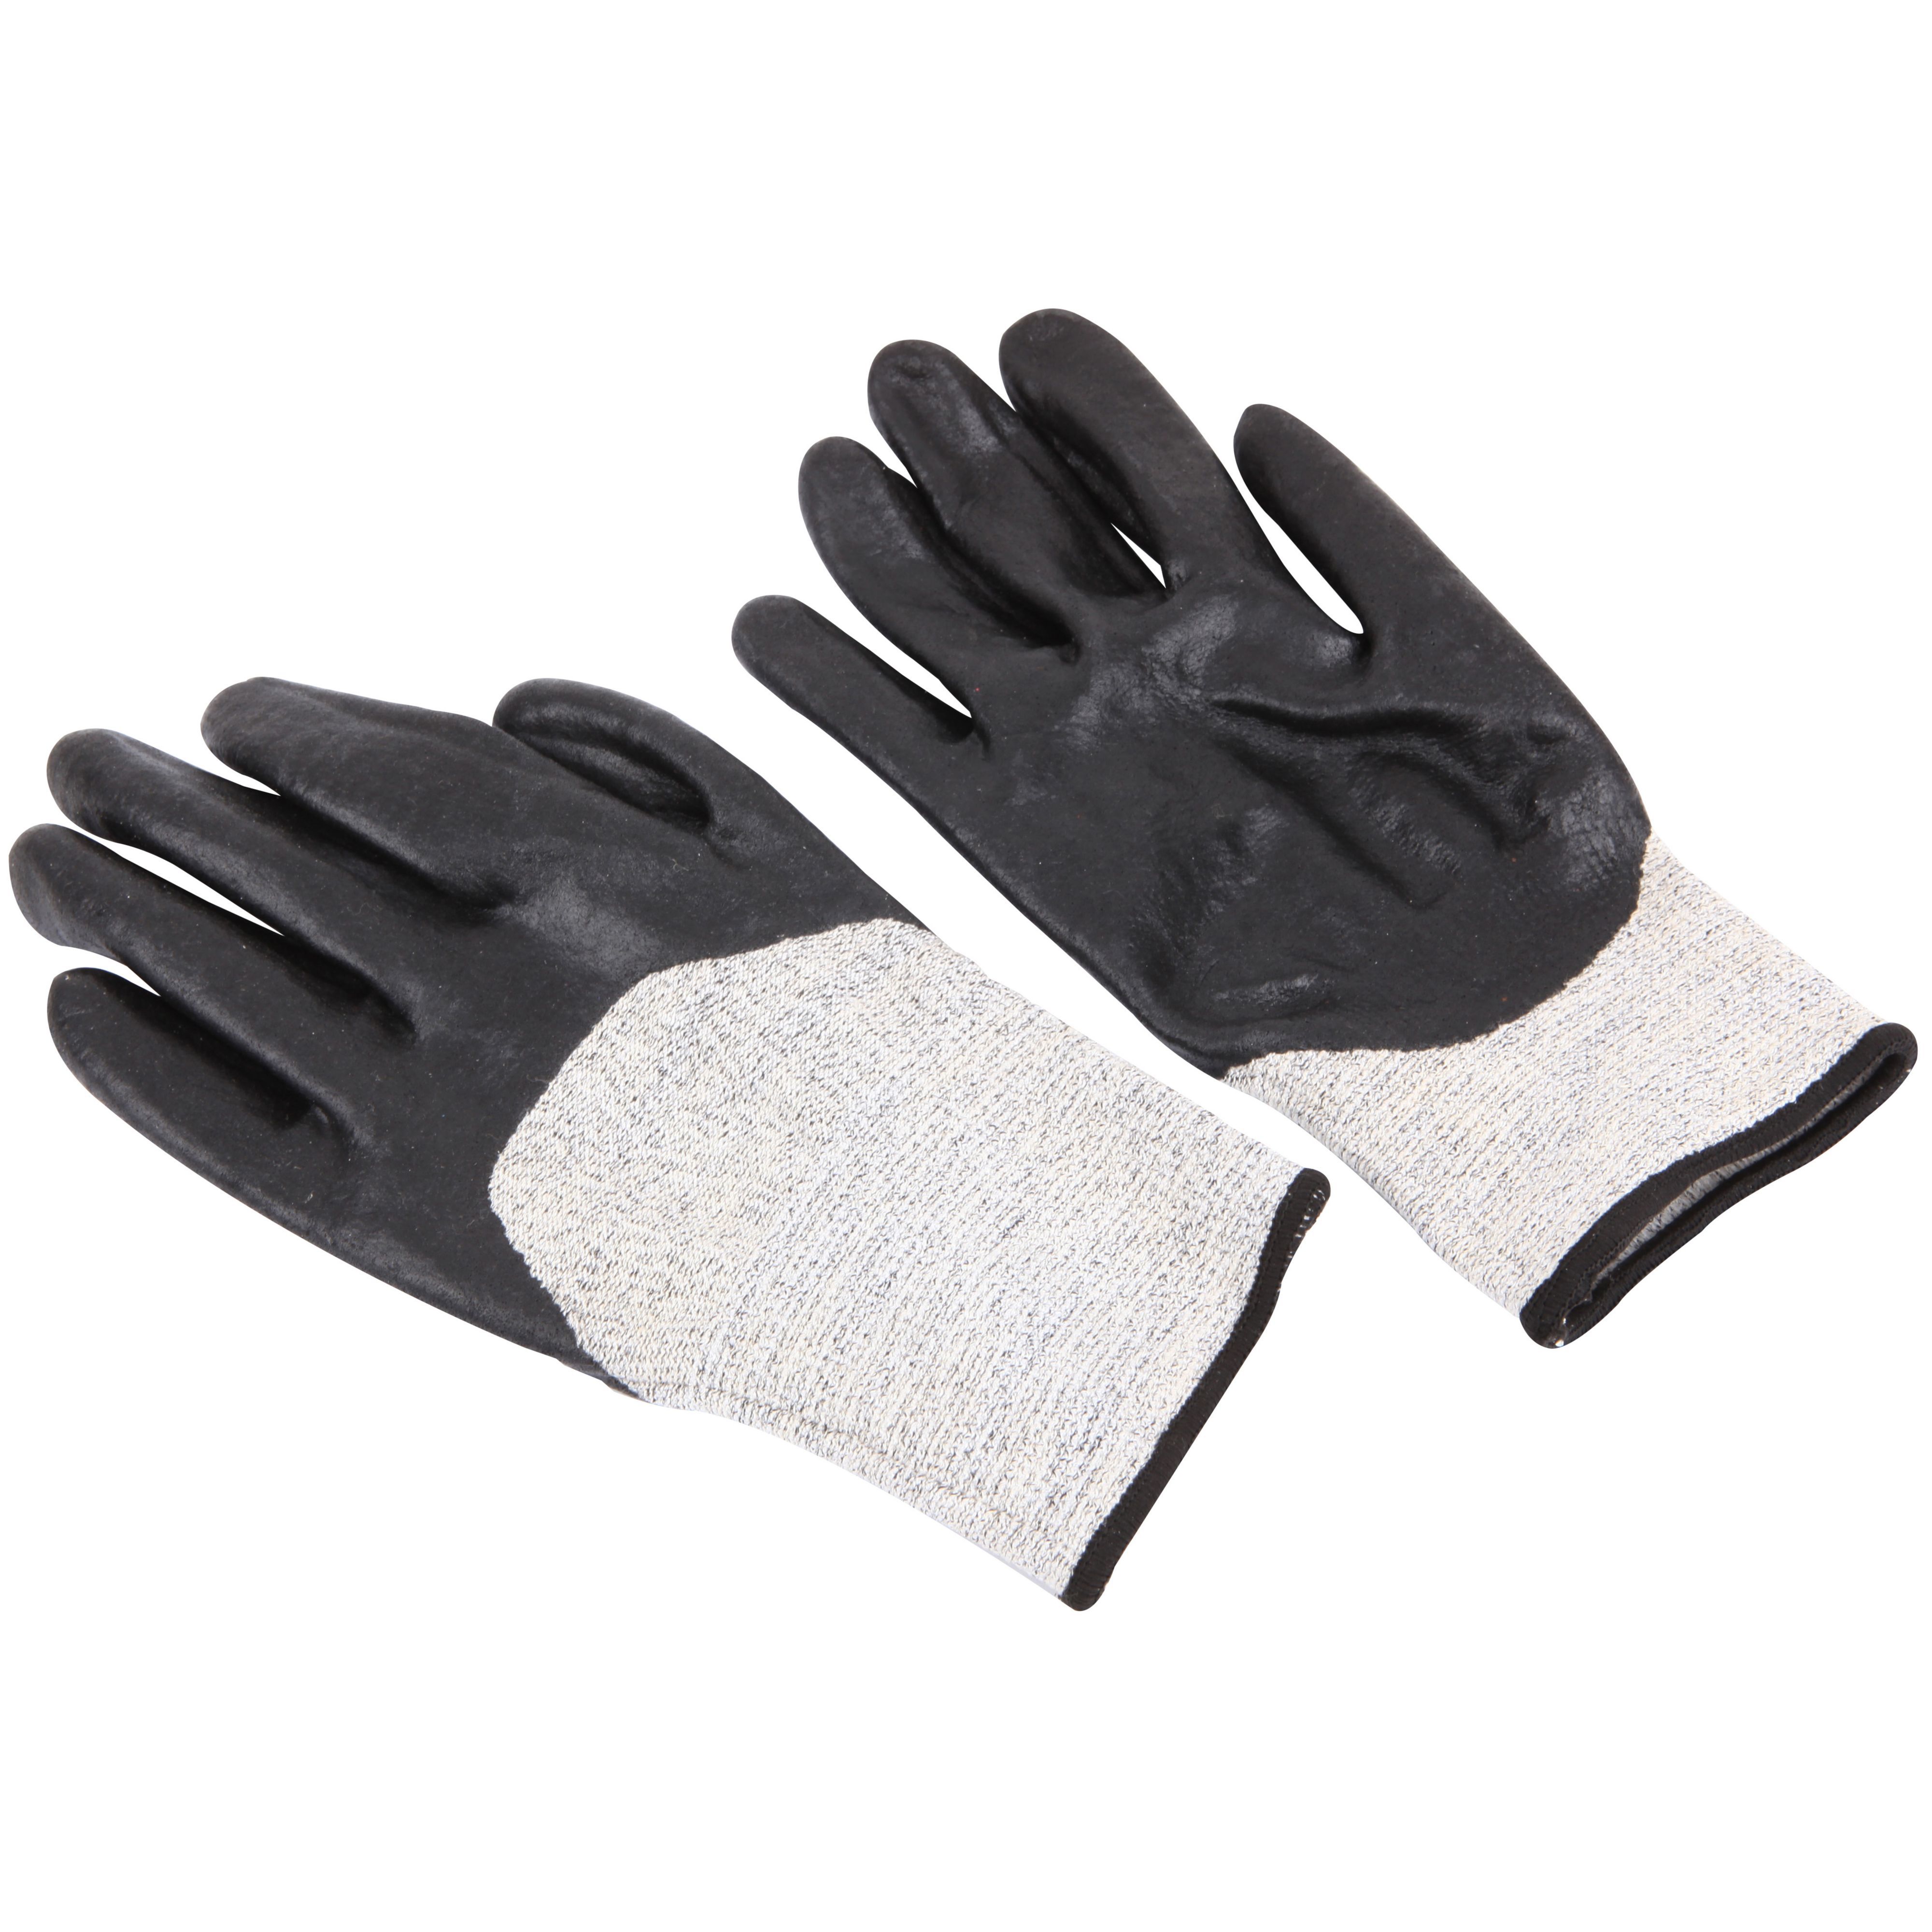 Diall Cut resistant gloves